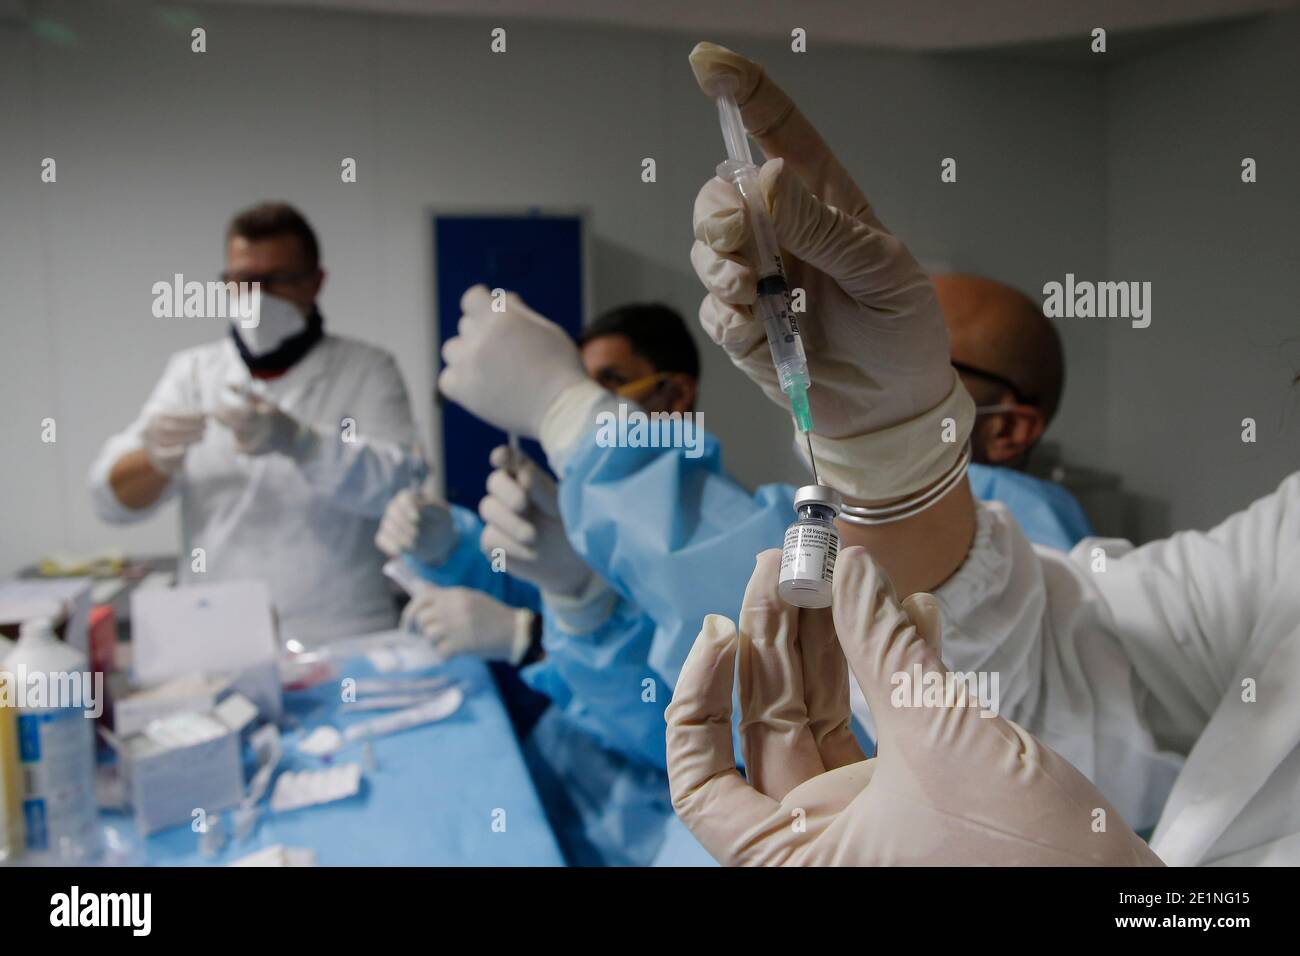 Naples, Italy. 08th Jan, 2021. Health workers prepare doses of the Pfizer-BioNTech COVID-19 vaccine at a coronavirus disease (COVID-19) vaccination center in Naples, Italy, Credit: Independent Photo Agency/Alamy Live News Stock Photo